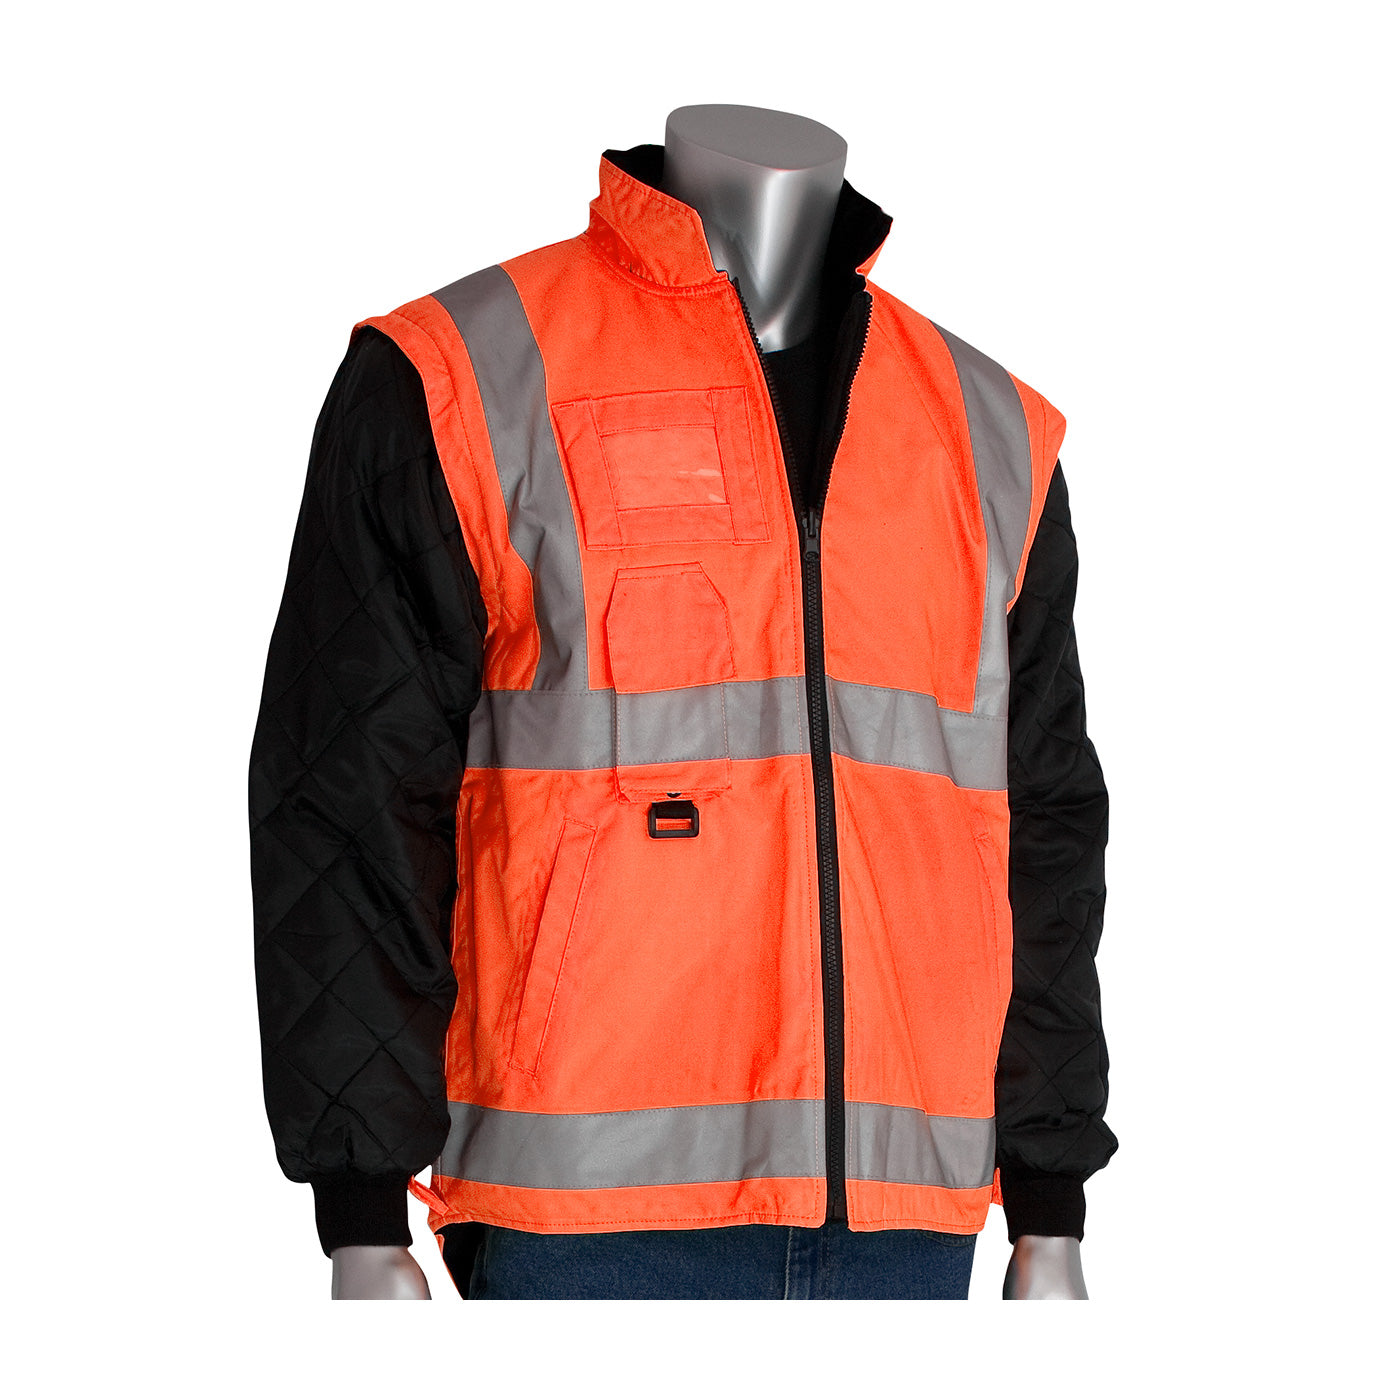 PIP 343-1756-OR/4X ANSI Type R Class 3 7-in-1 All Conditions Coat with Inner Jacket and Vest Combination